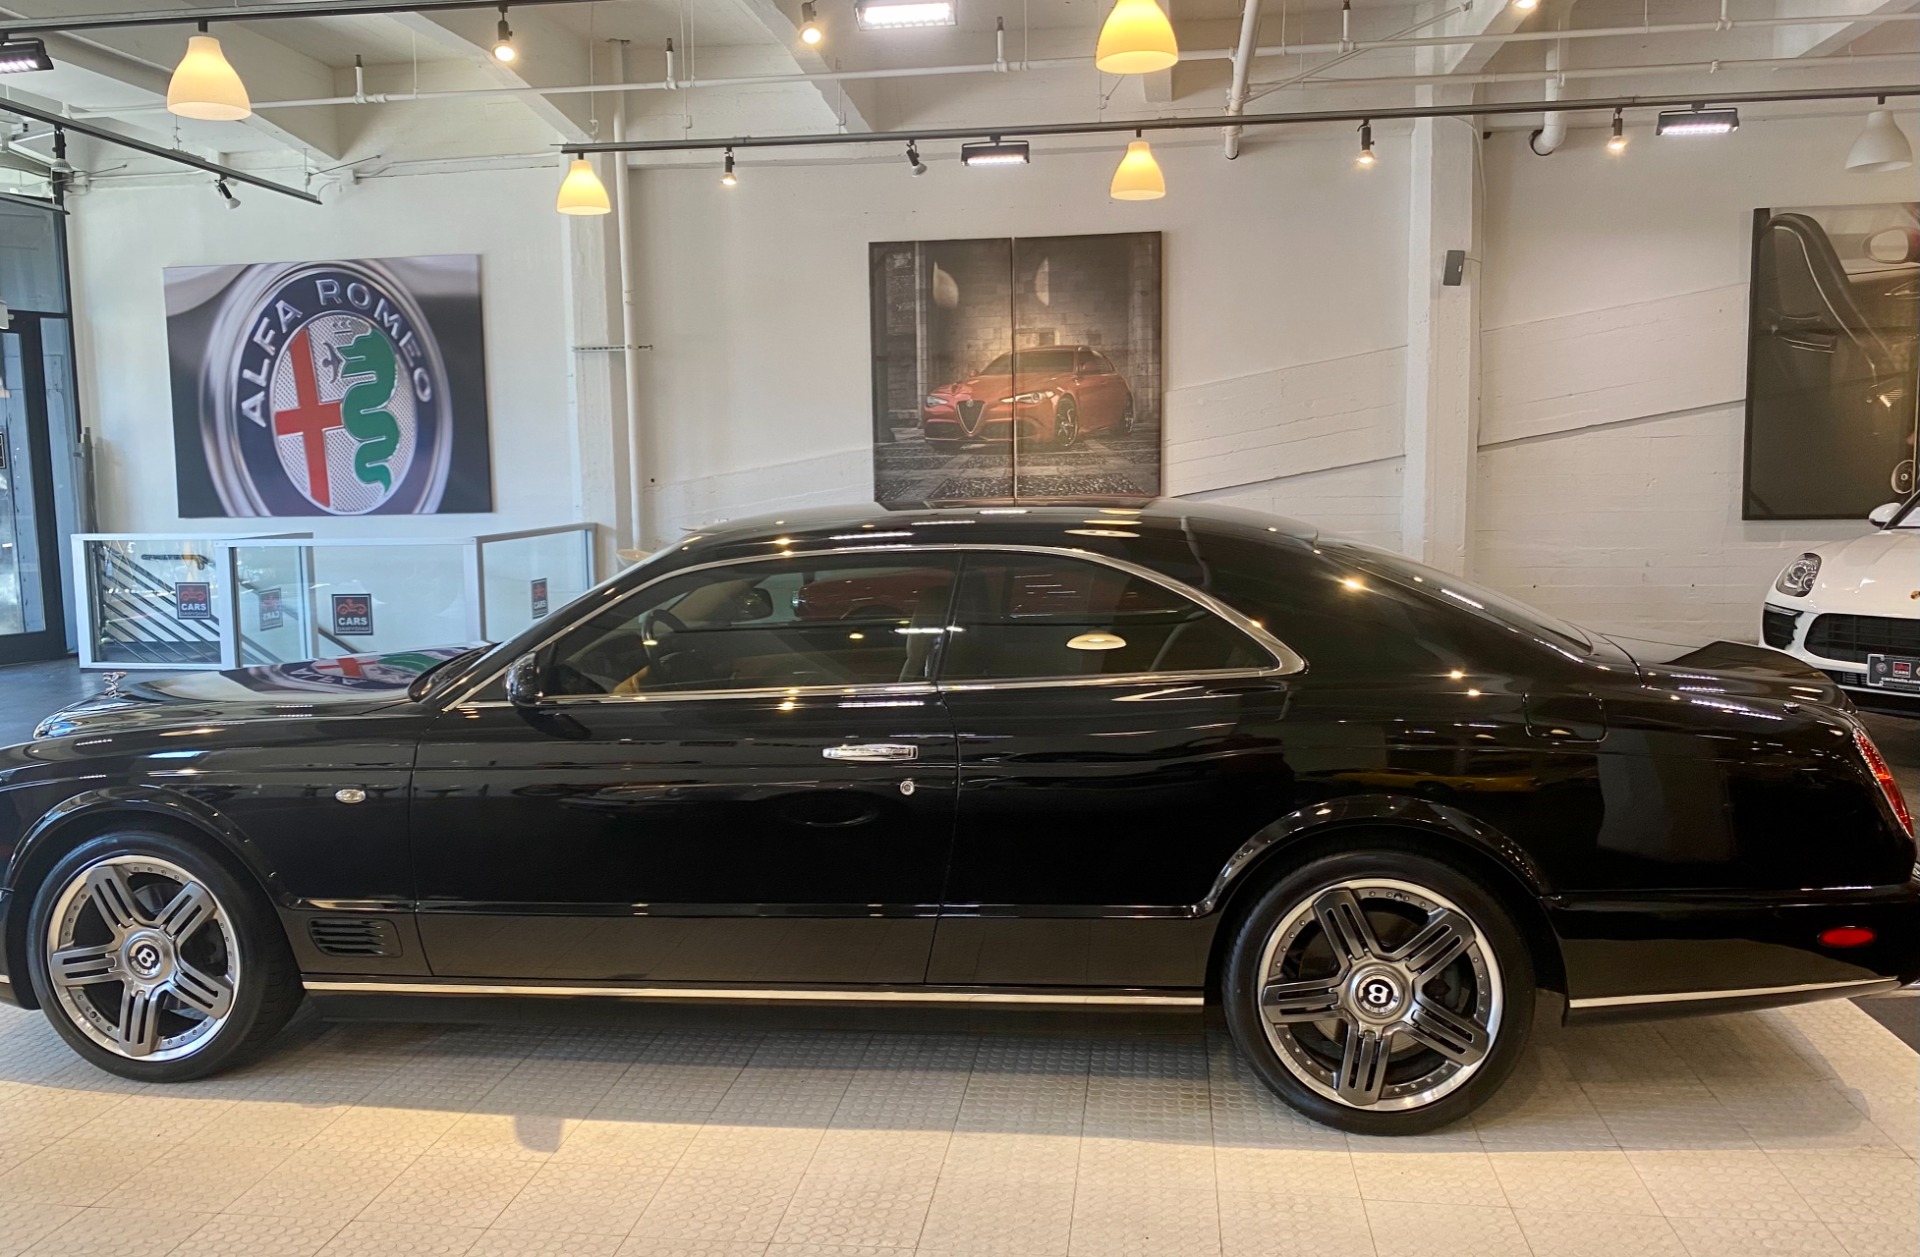 Used 2009 Bentley Brooklands For Sale ($81,000) | Cars Dawydiak Stock  #210501